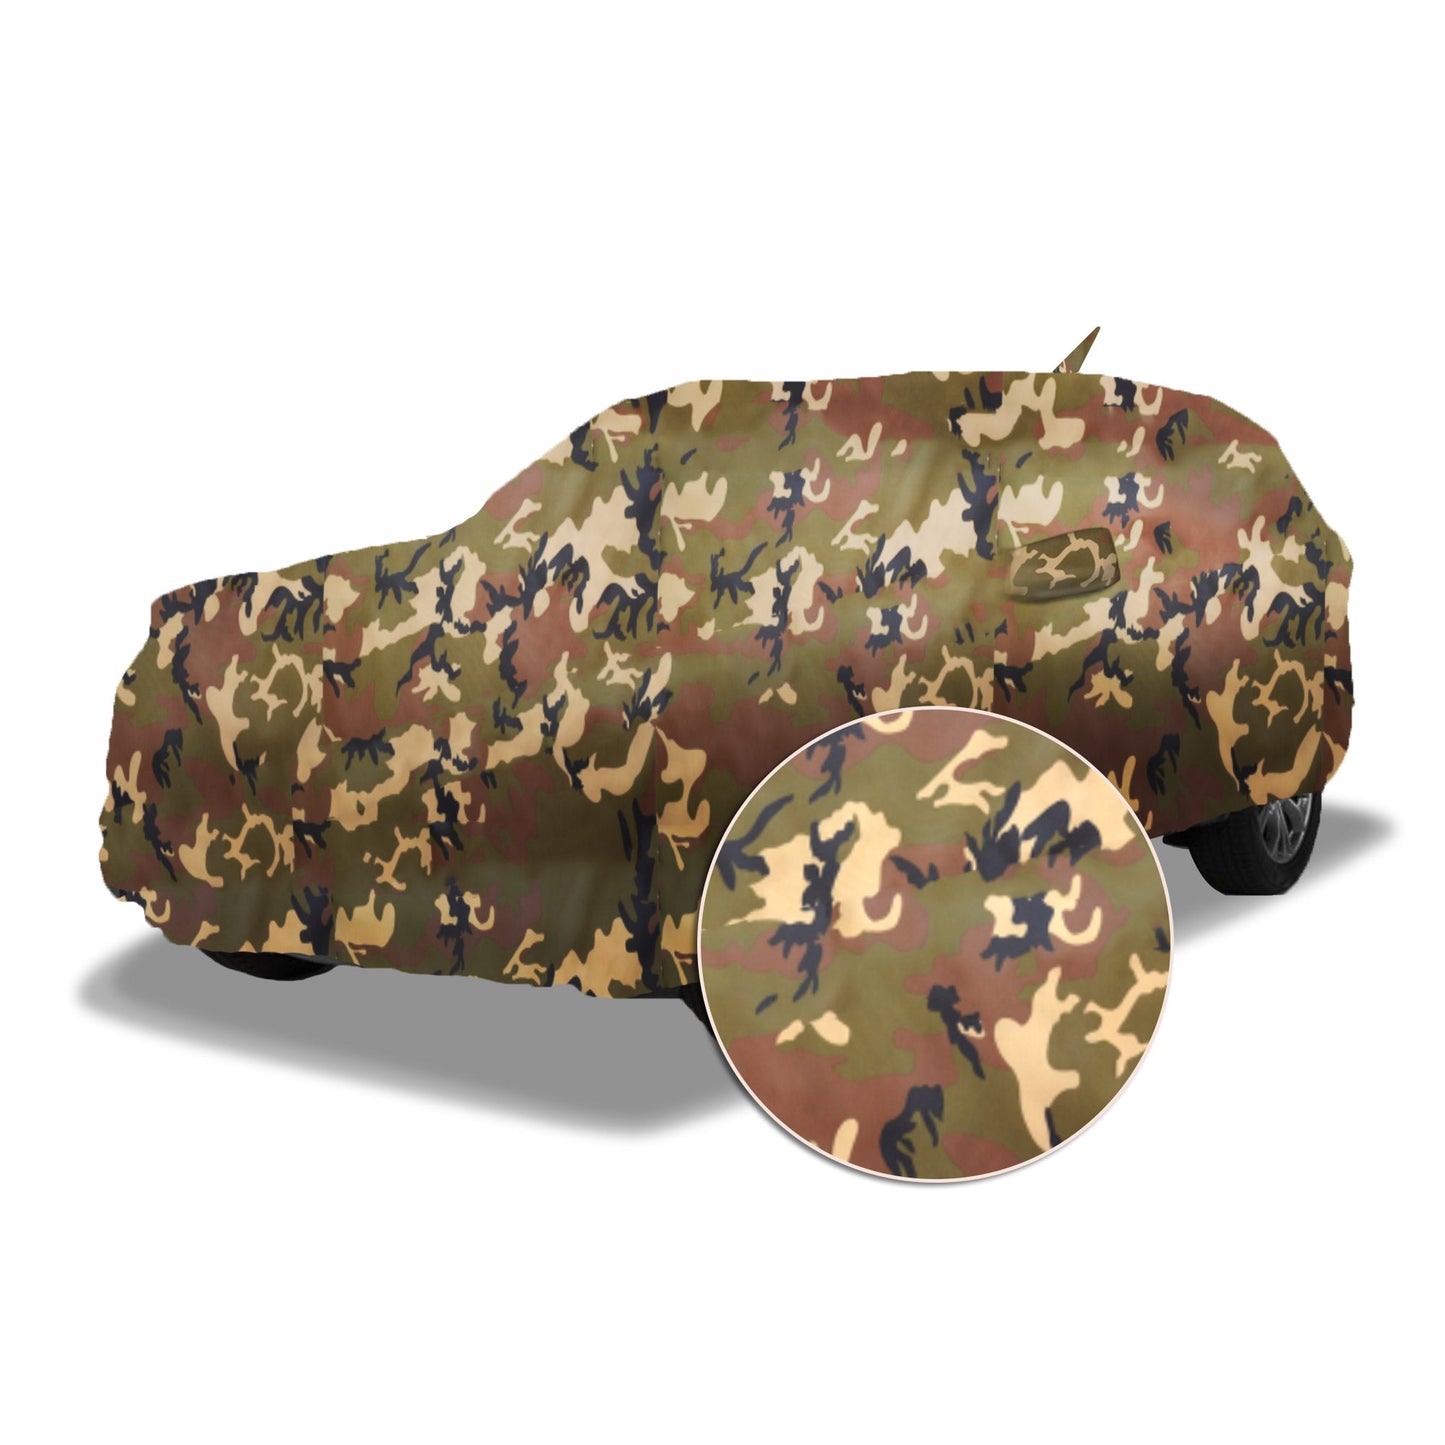 Ascot Maruti Zen Estilo Car Body Cover Extra Strong & Dust Proof Jungle Military Car Cover with UV Proof & Water-Resistant Coating